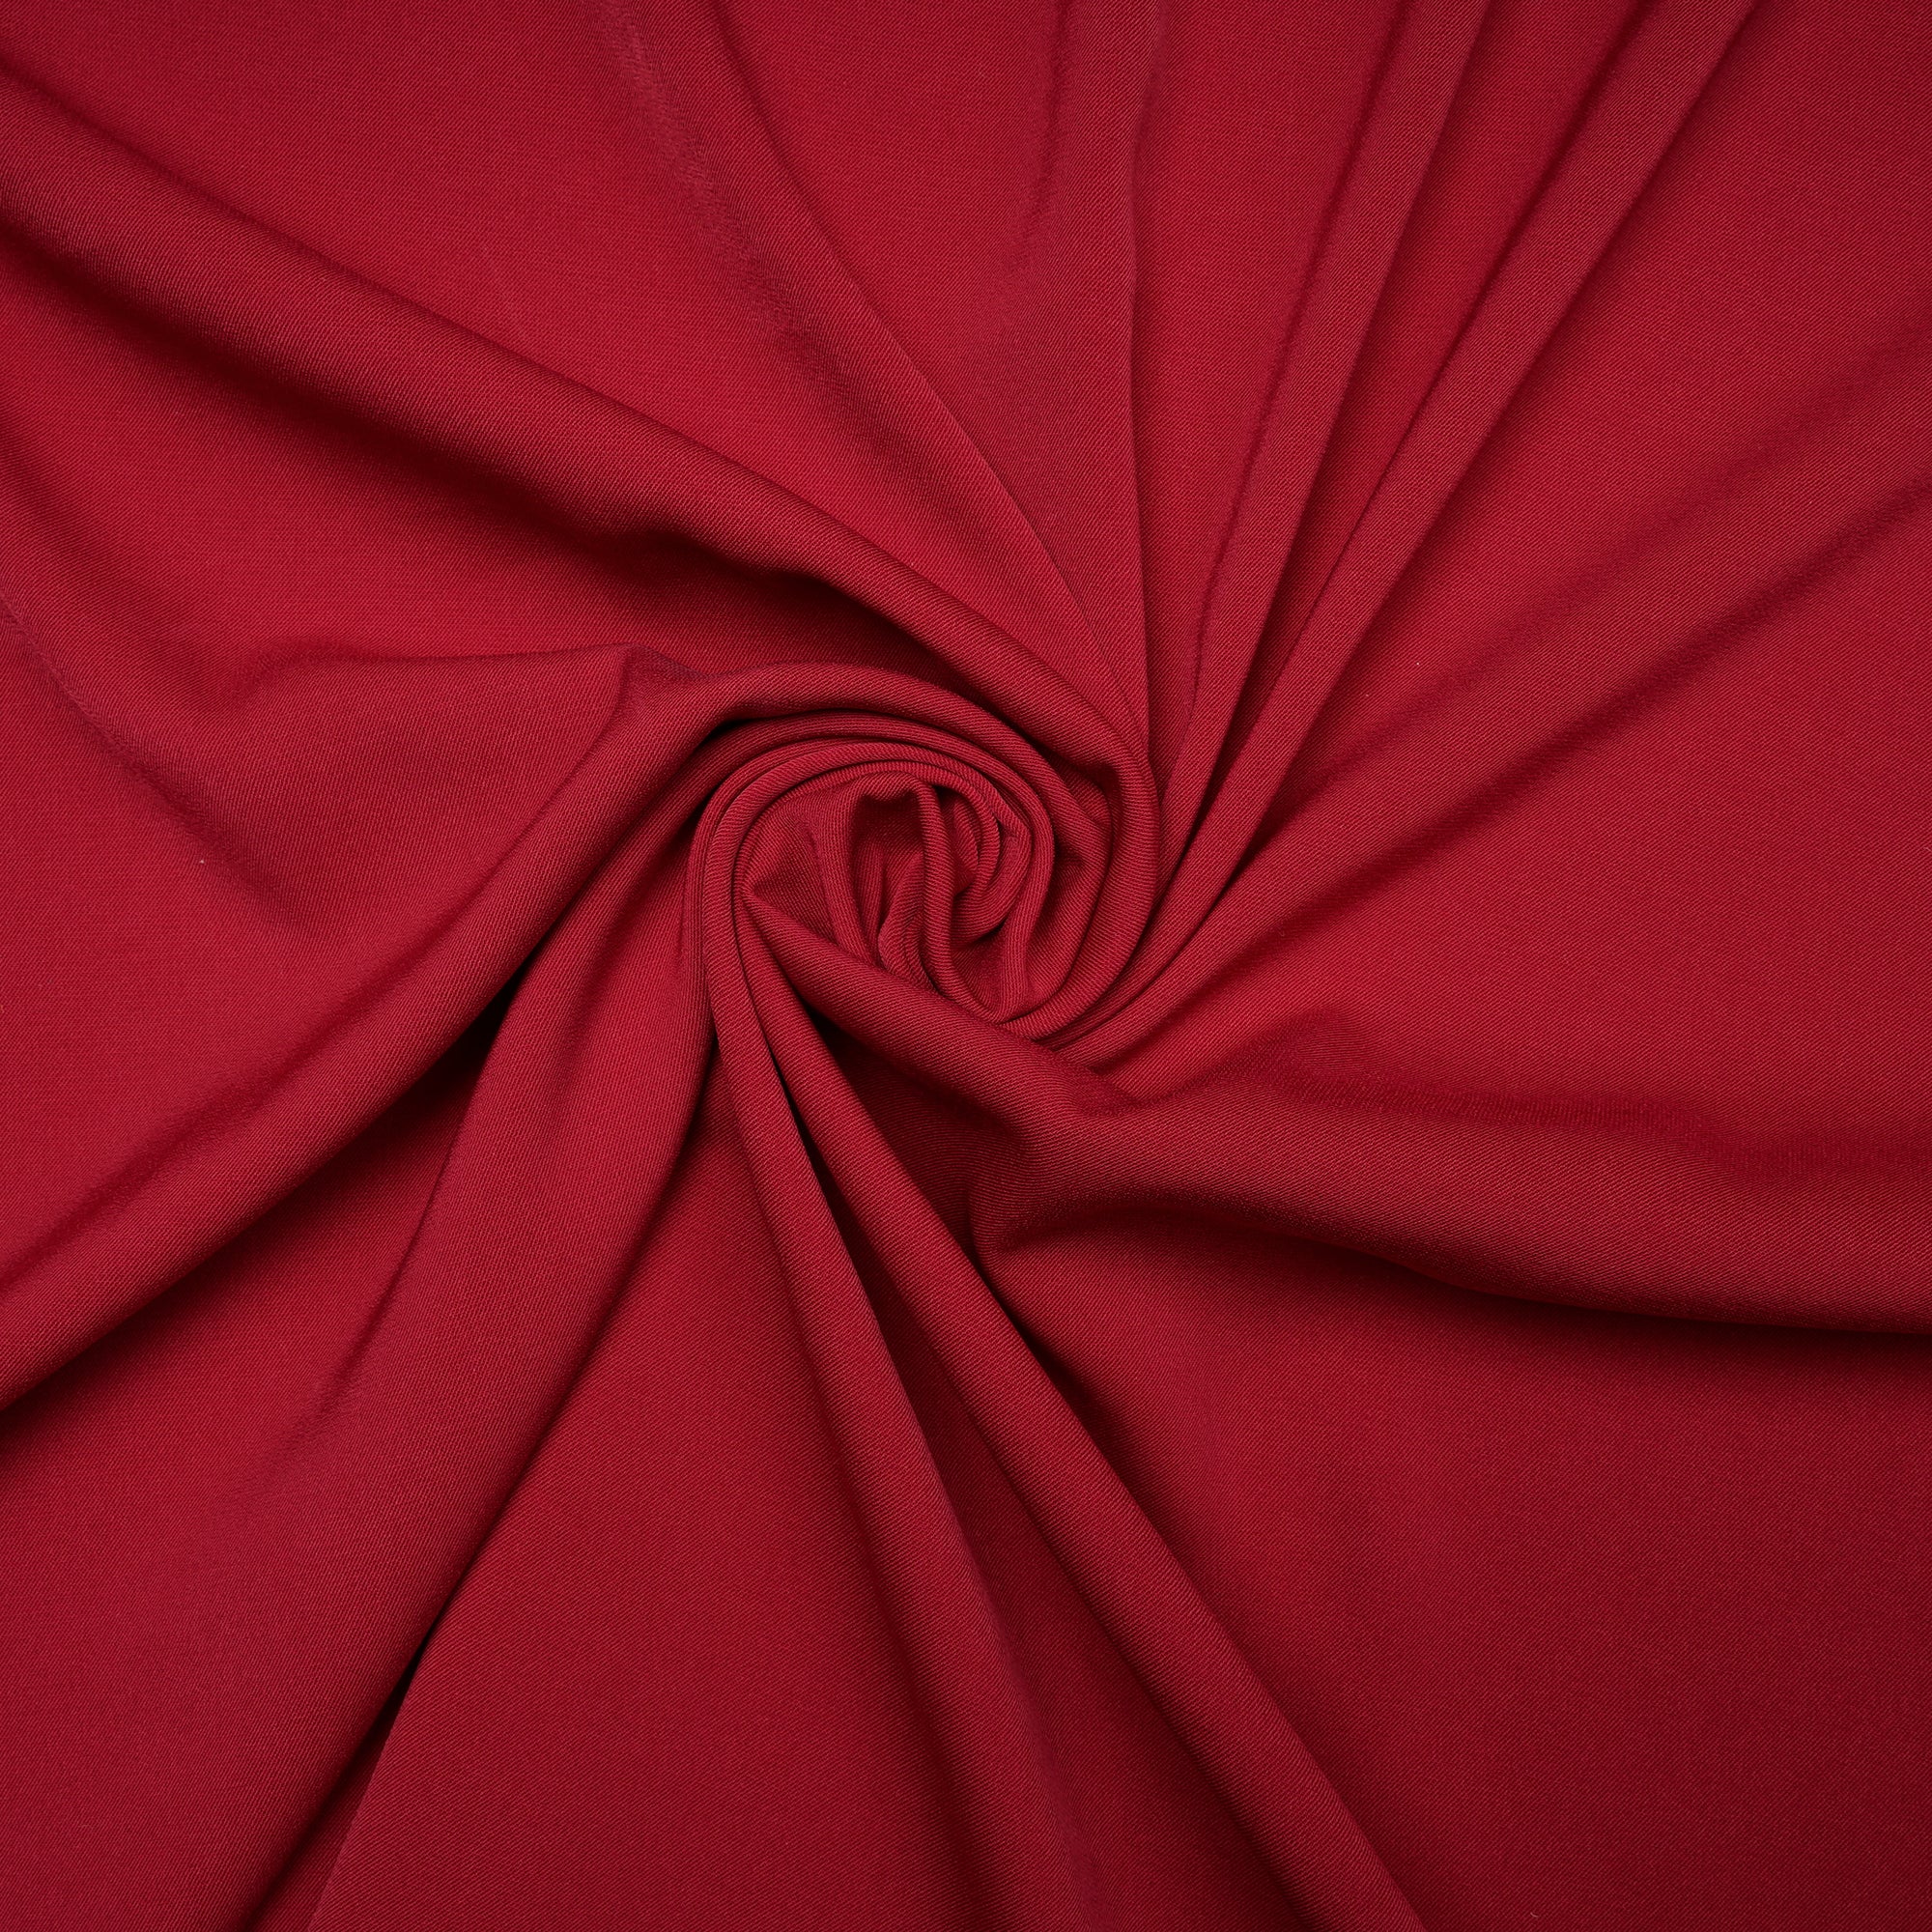 Maroon Solid Dyed Imported Prada Crepe Fabric (60" Width)